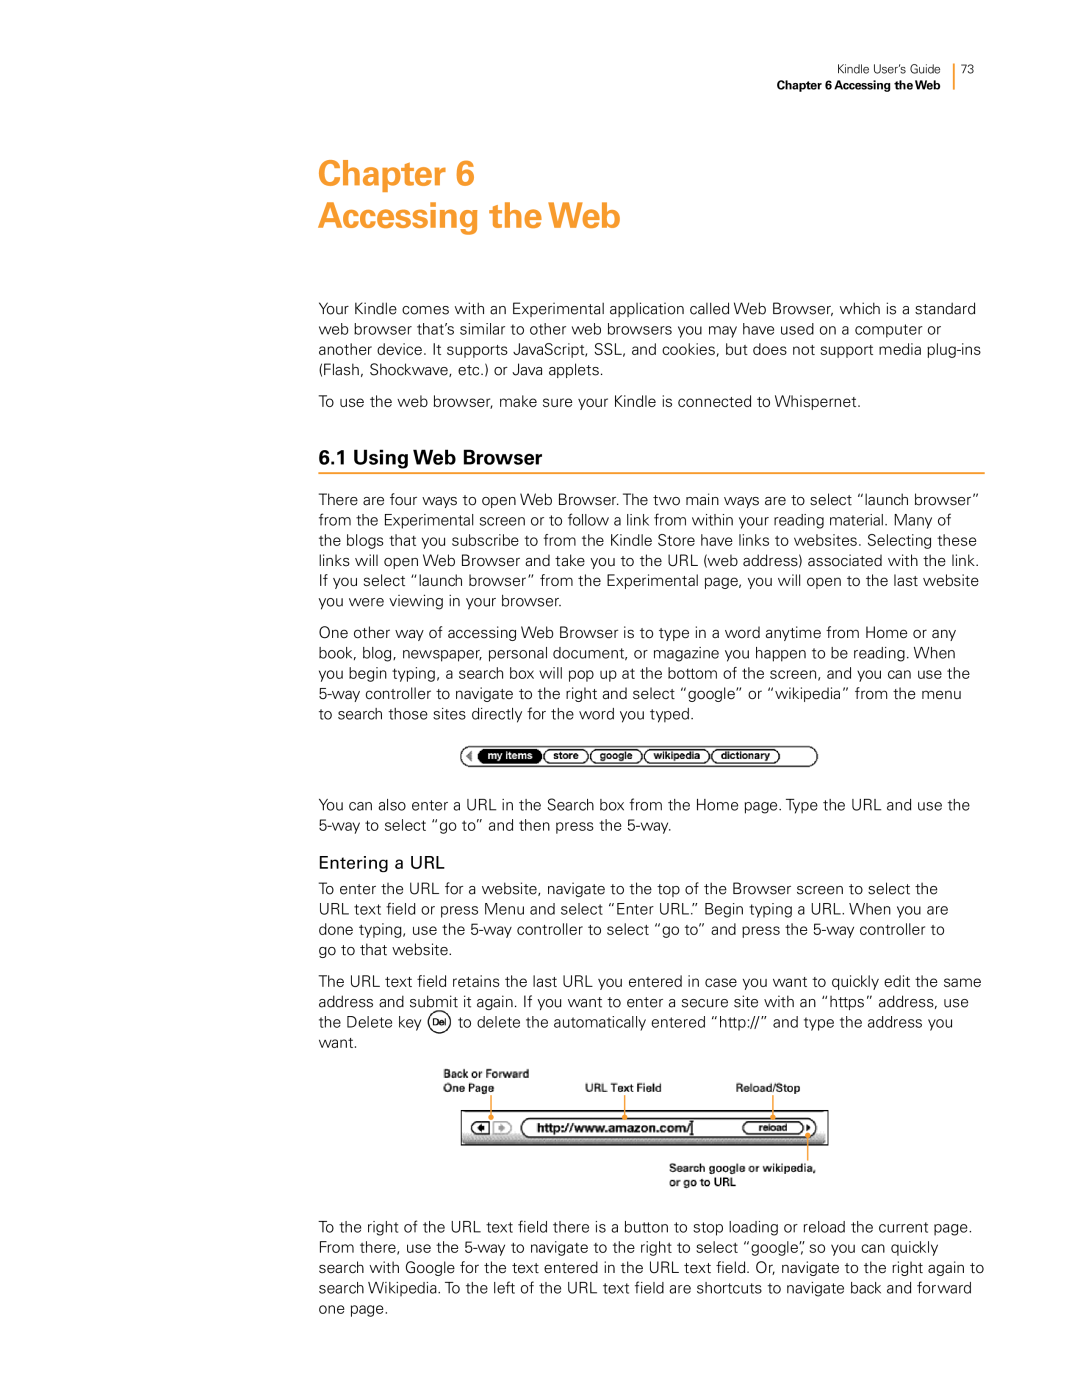 Amazon KNDKYBRD3G manual Chapter Accessing the Web, Using Web Browser, Entering a URL 